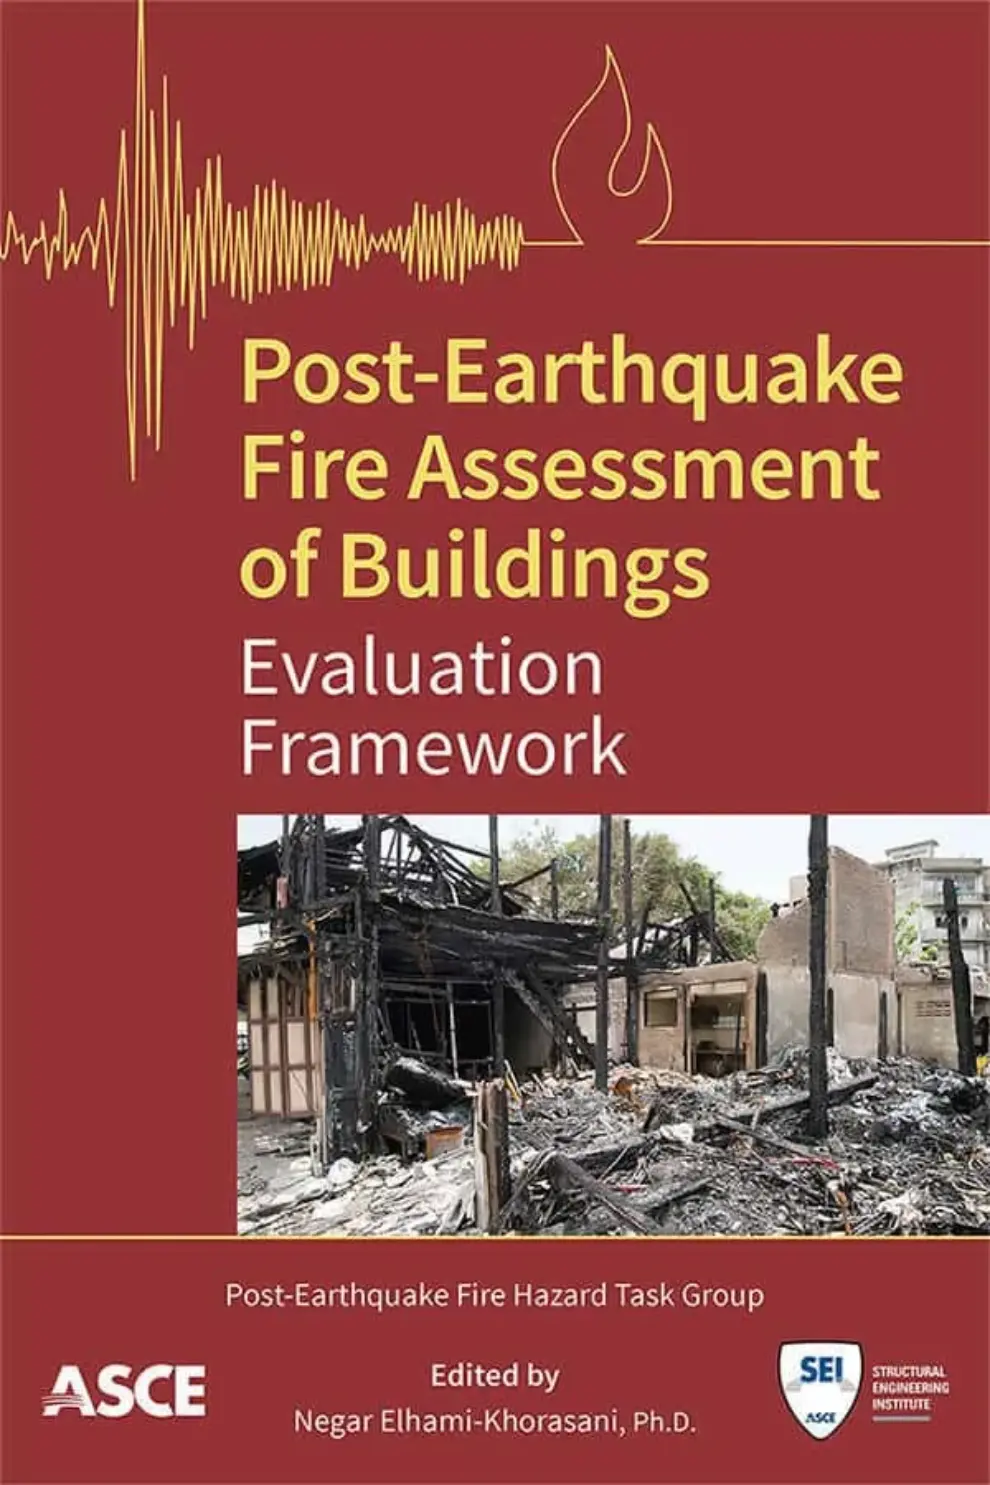 New ASCE Publication Outlines Issues Associated Fire After an Earthquake